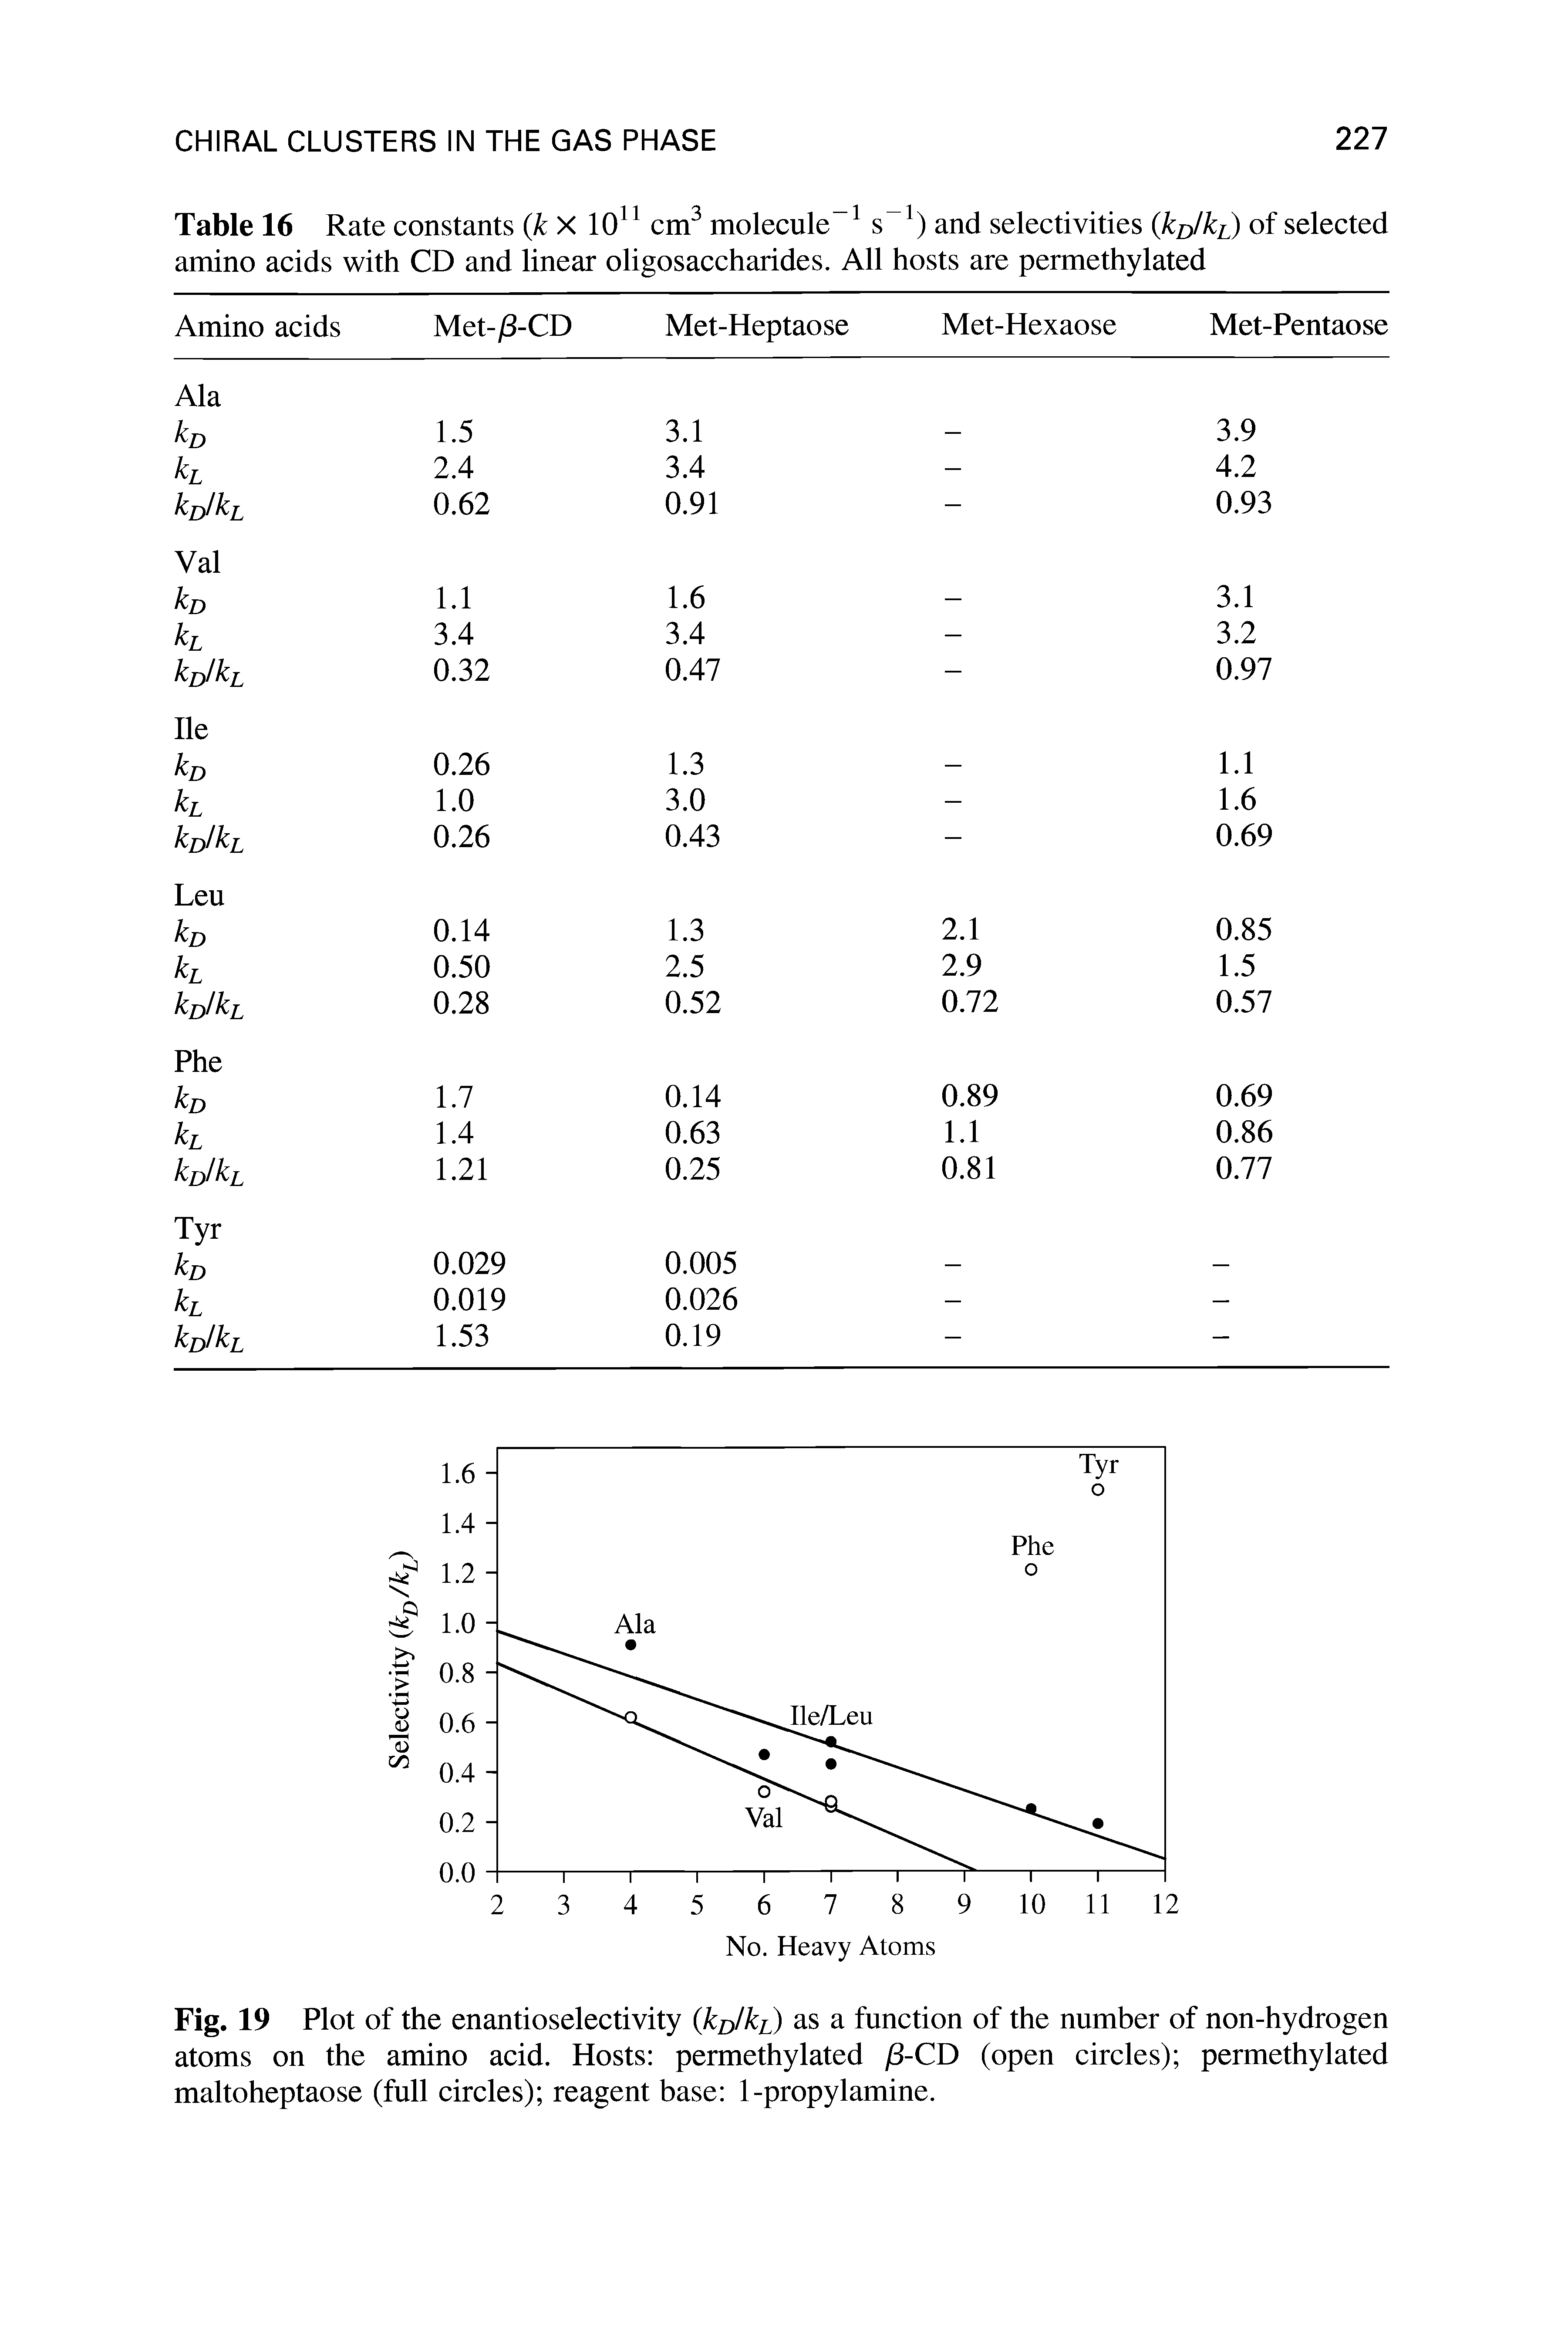 Table 16 Rate constants k X 10 cm molecule s and selectivities kr>lki) of selected amino acids with CD and linear oligosaccharides. All hosts are permethylated...